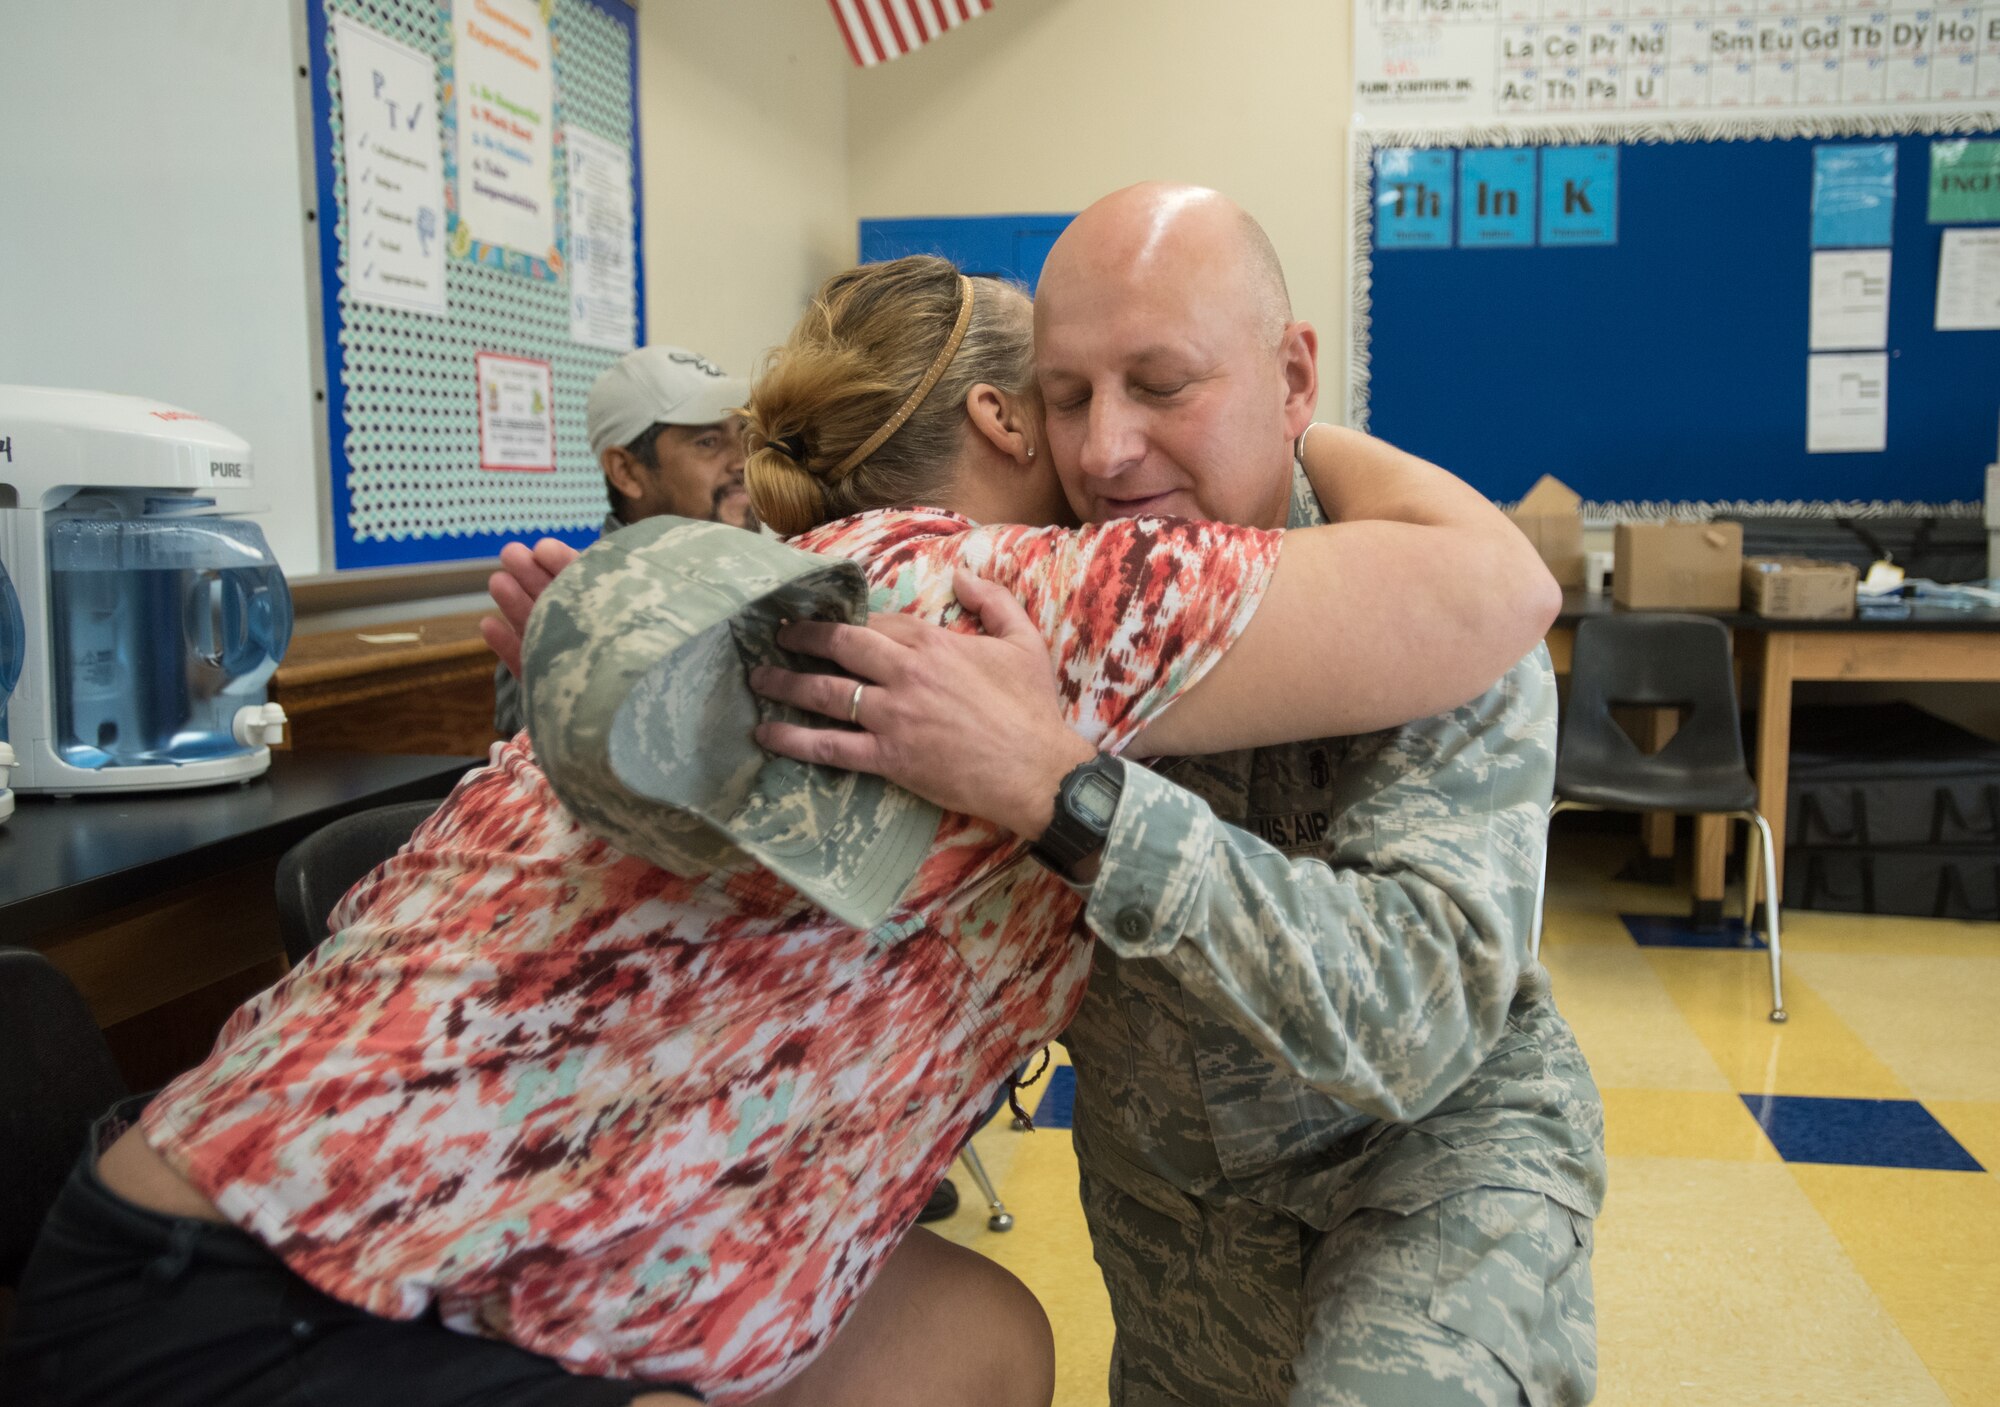 Col. Michael Cooper, commander of the Kentucky Air National Guard’s 123rd Medical Group, receives a hug from a Western Kentucky resident as thanks for the no-cost medical care she received at a military clinic at Paducah Tilghman High School in Paducah, Ky., July 23, 2016. The clinic and two others in Western Kentucky have provided thousands of medical, dental and optical services to area residents since standing up July 18 as part of a program called Bluegrass Medical Innovative Readiness Training. The program is a partnership between the U.S. Department of Defense and the Delta Regional Authority, with care provided by members of the U.S. Navy Reserve and the Air National Guard. (U.S. Air National Guard photo by Master Sgt. Phil Speck)